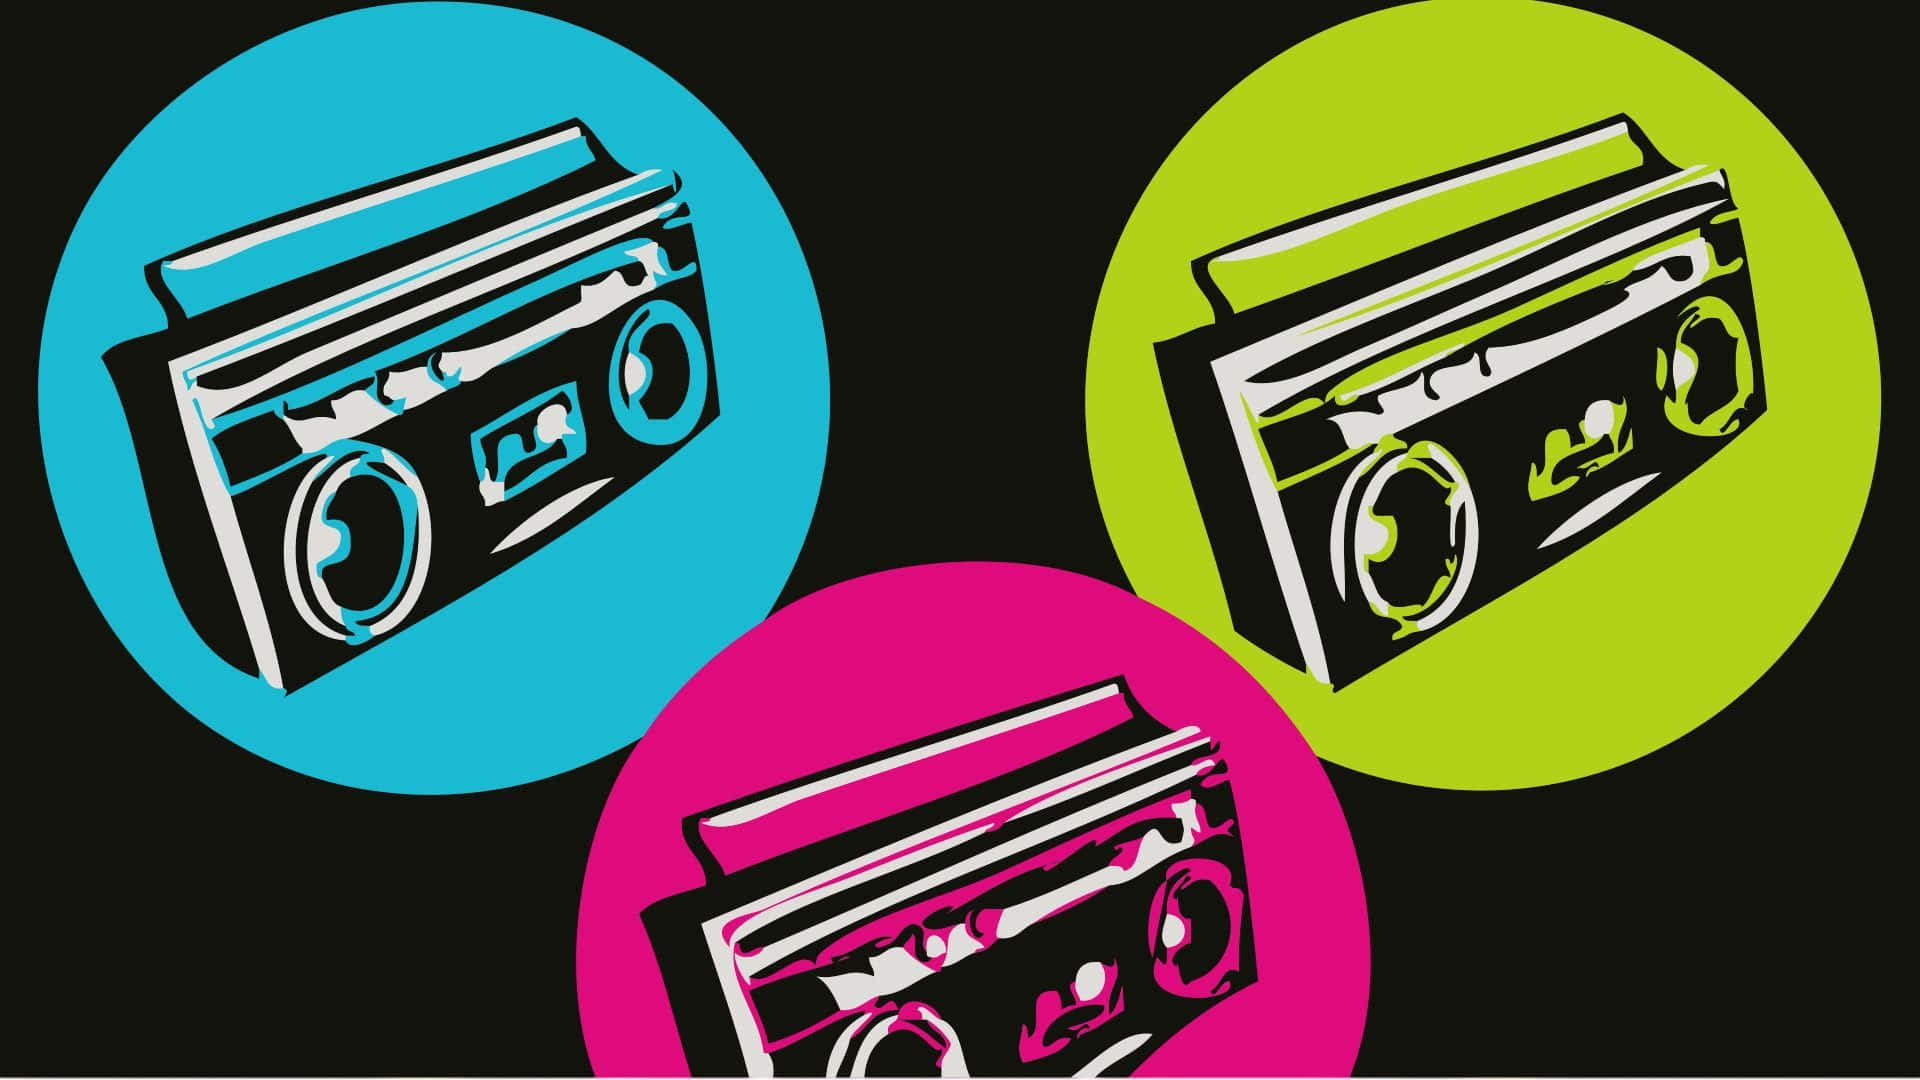 Colorful Old School Boombox Art